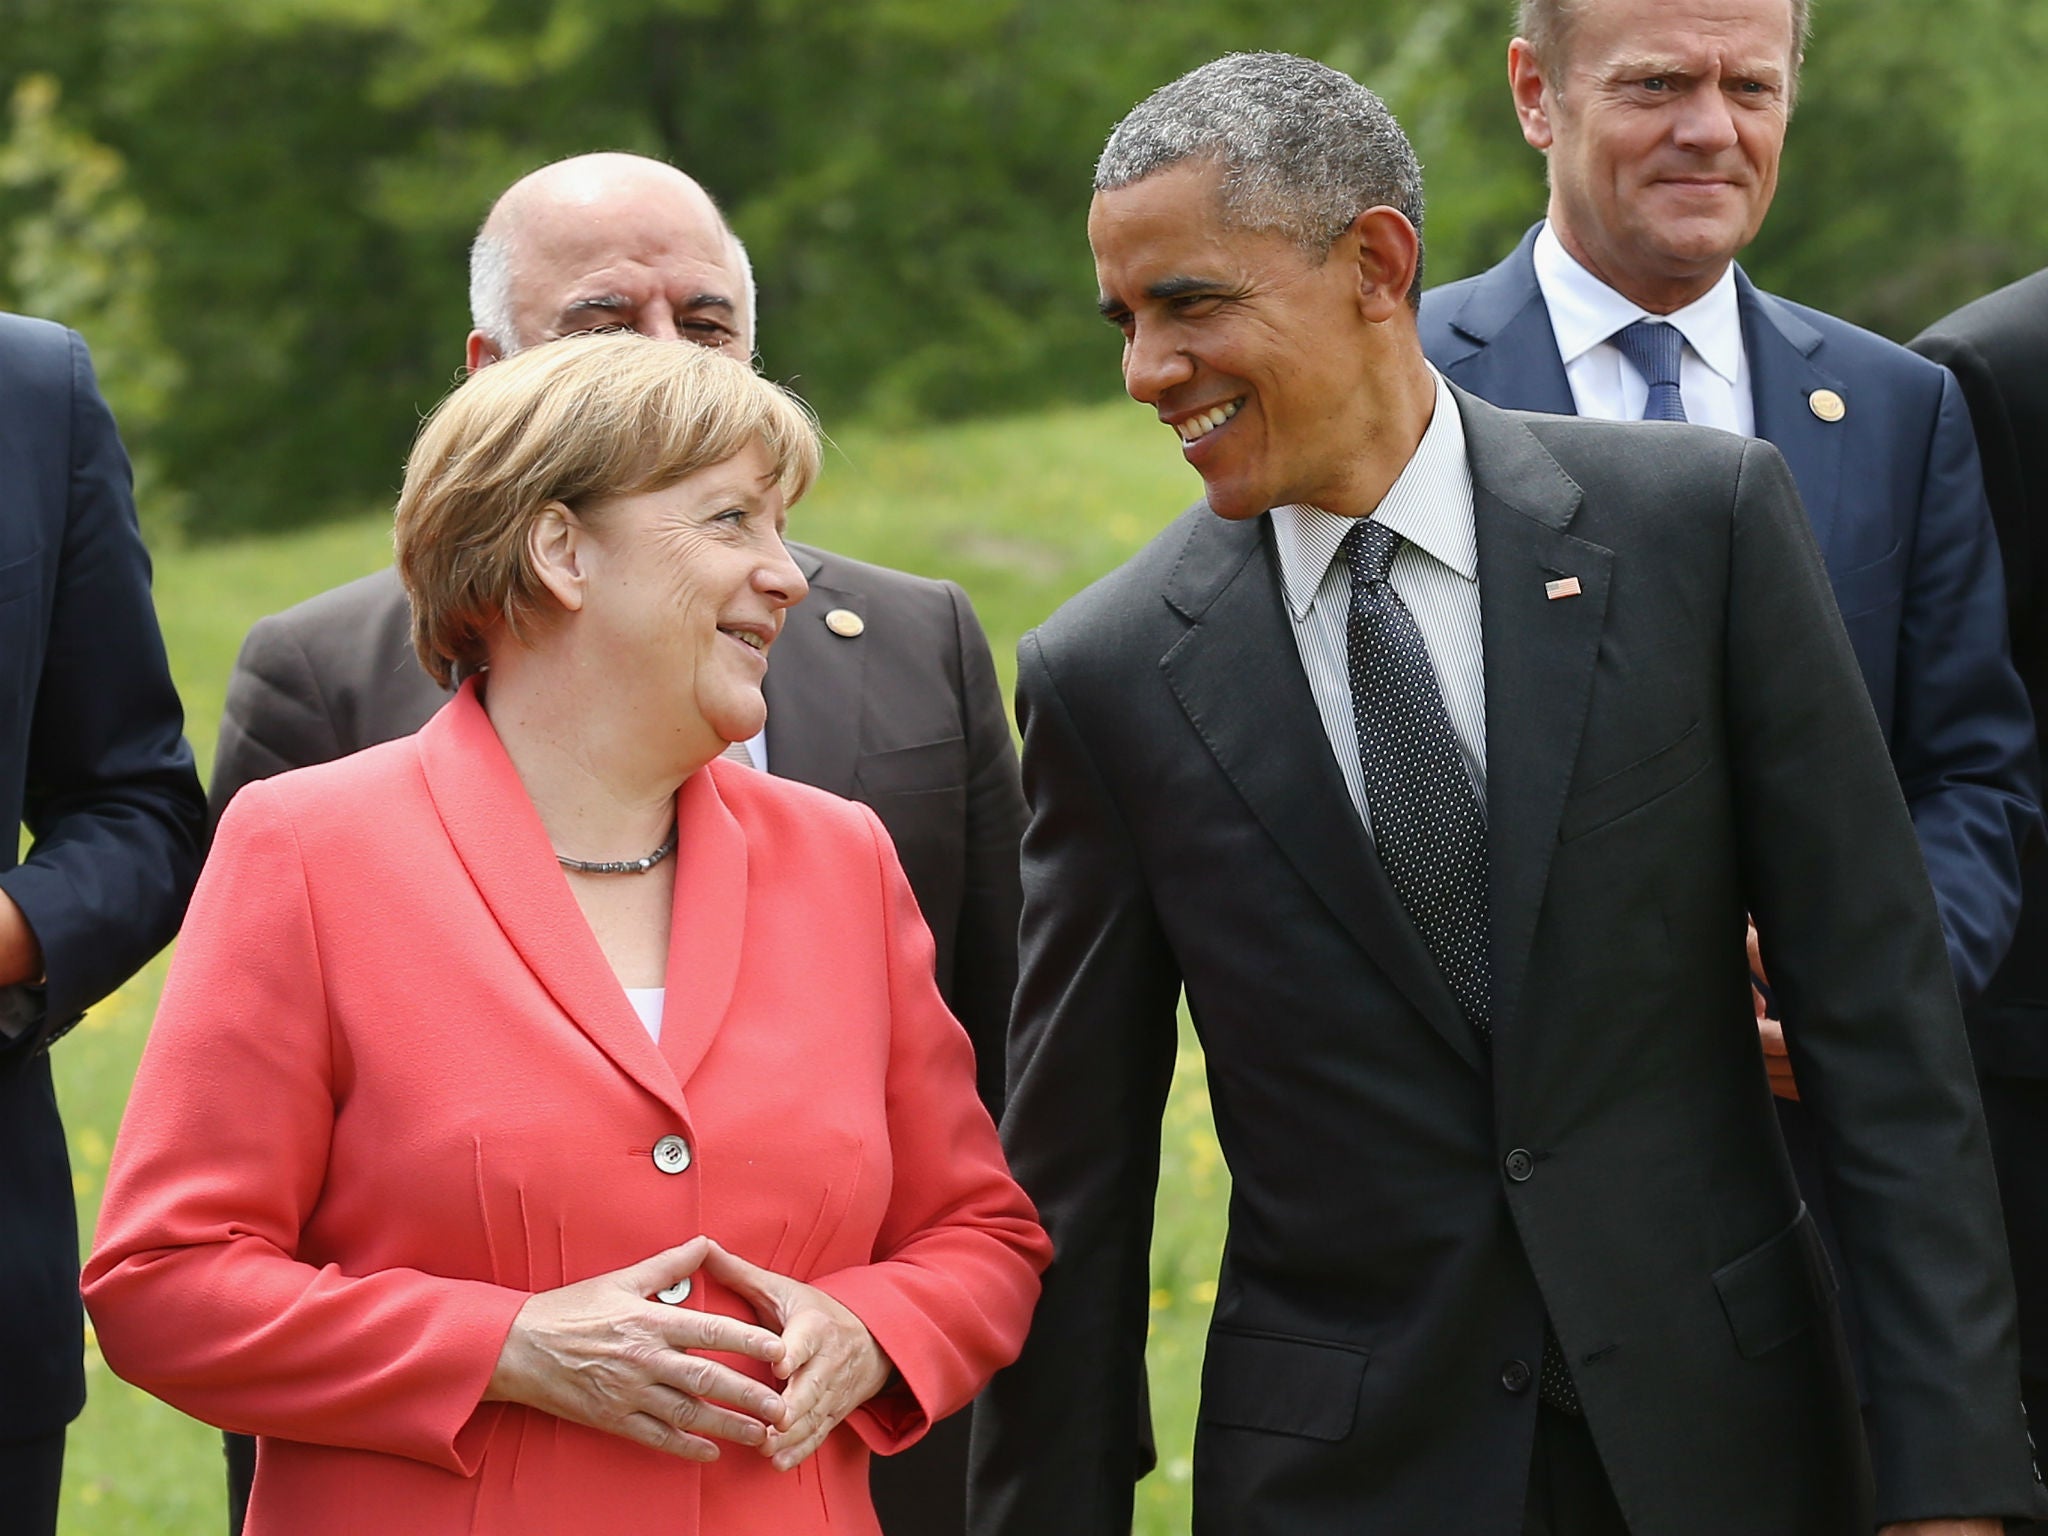 Obama and Merkel talking of lighter subjects in June last year